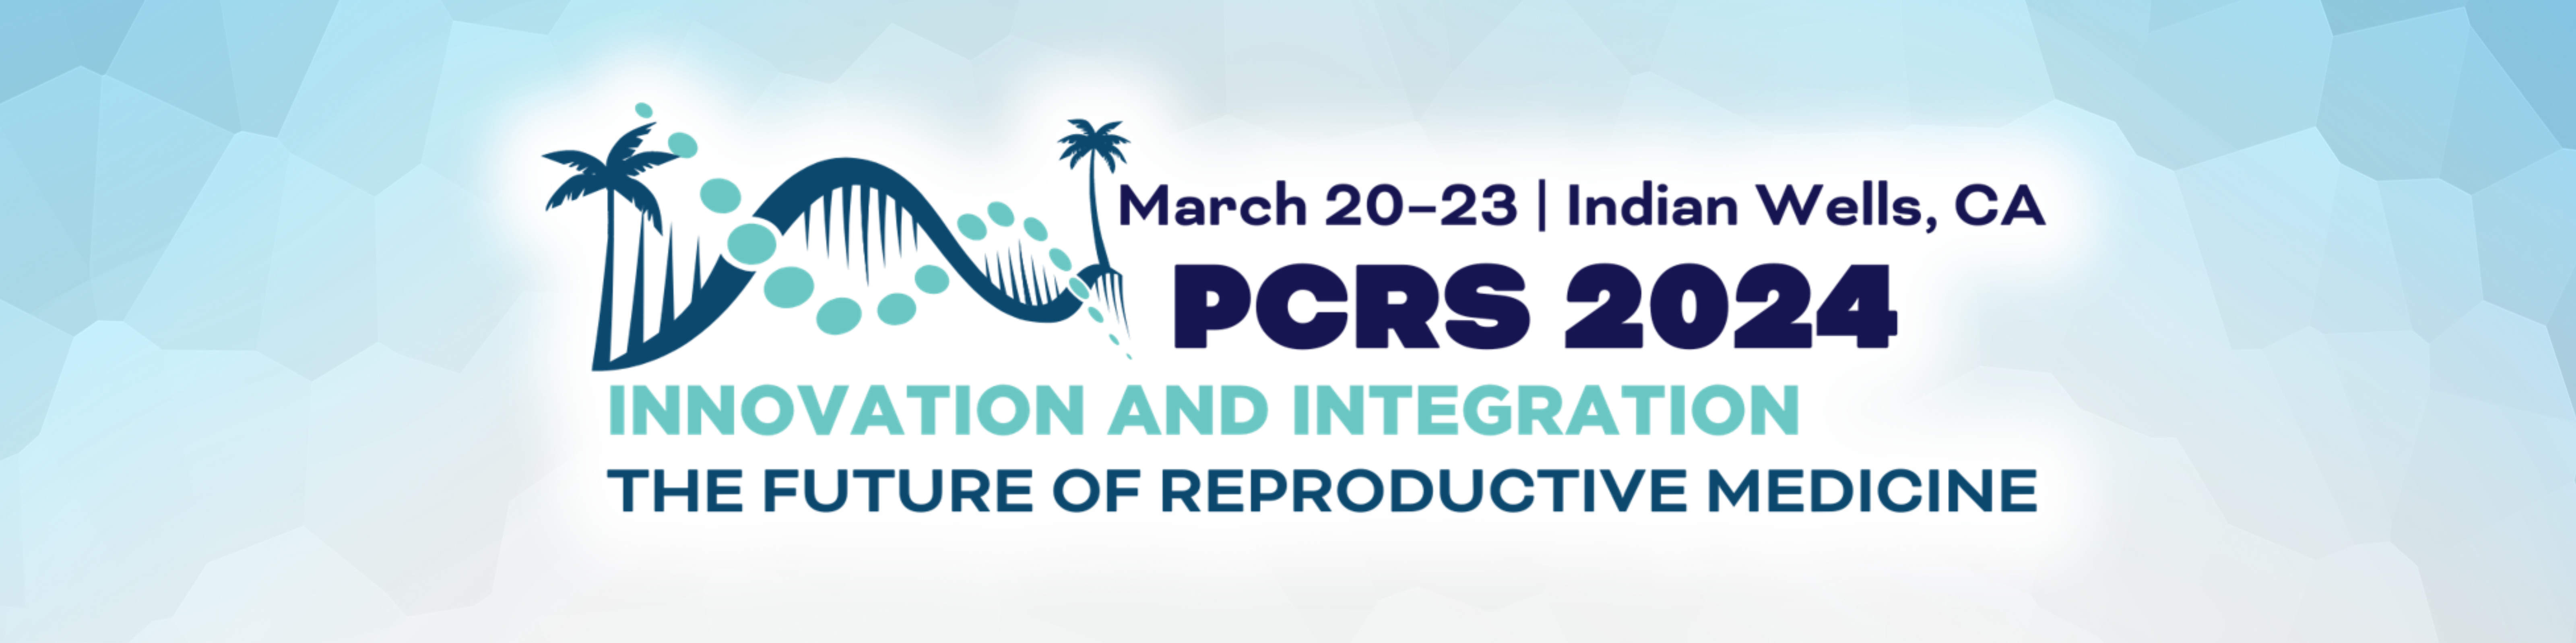 PCRS 2024 Annual Meeting